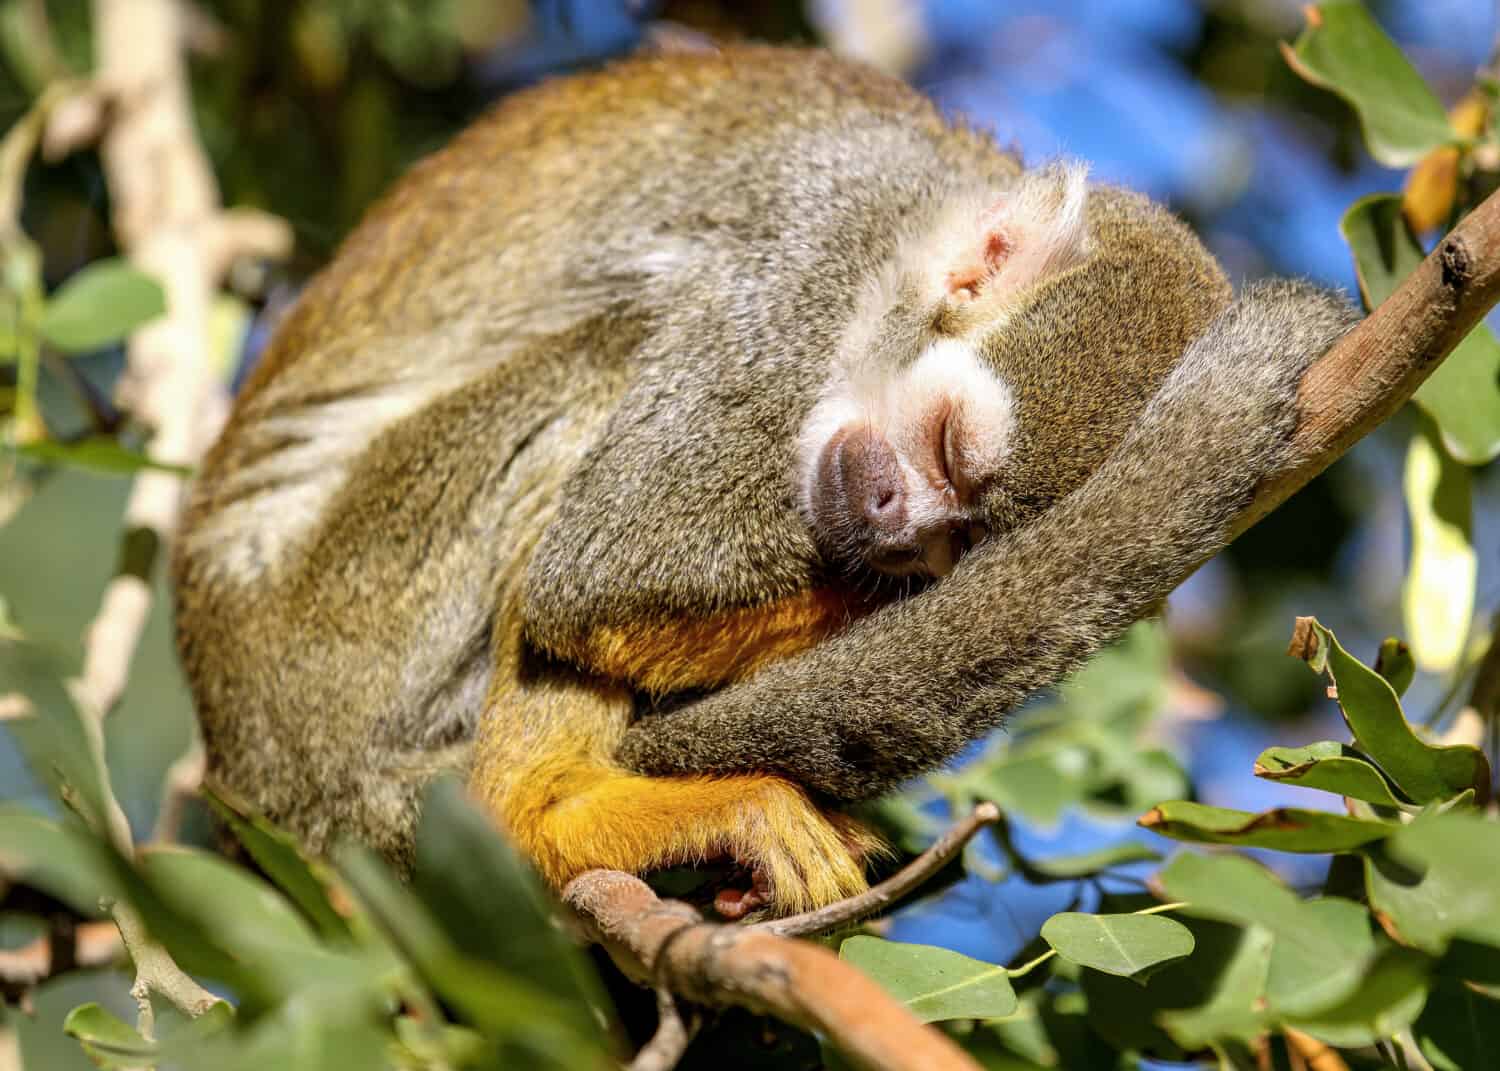 Squirrel monkey sleeping on a tree branch in the sun with tail curled up around the body. Monkey sleeps peacefully in the sunlight